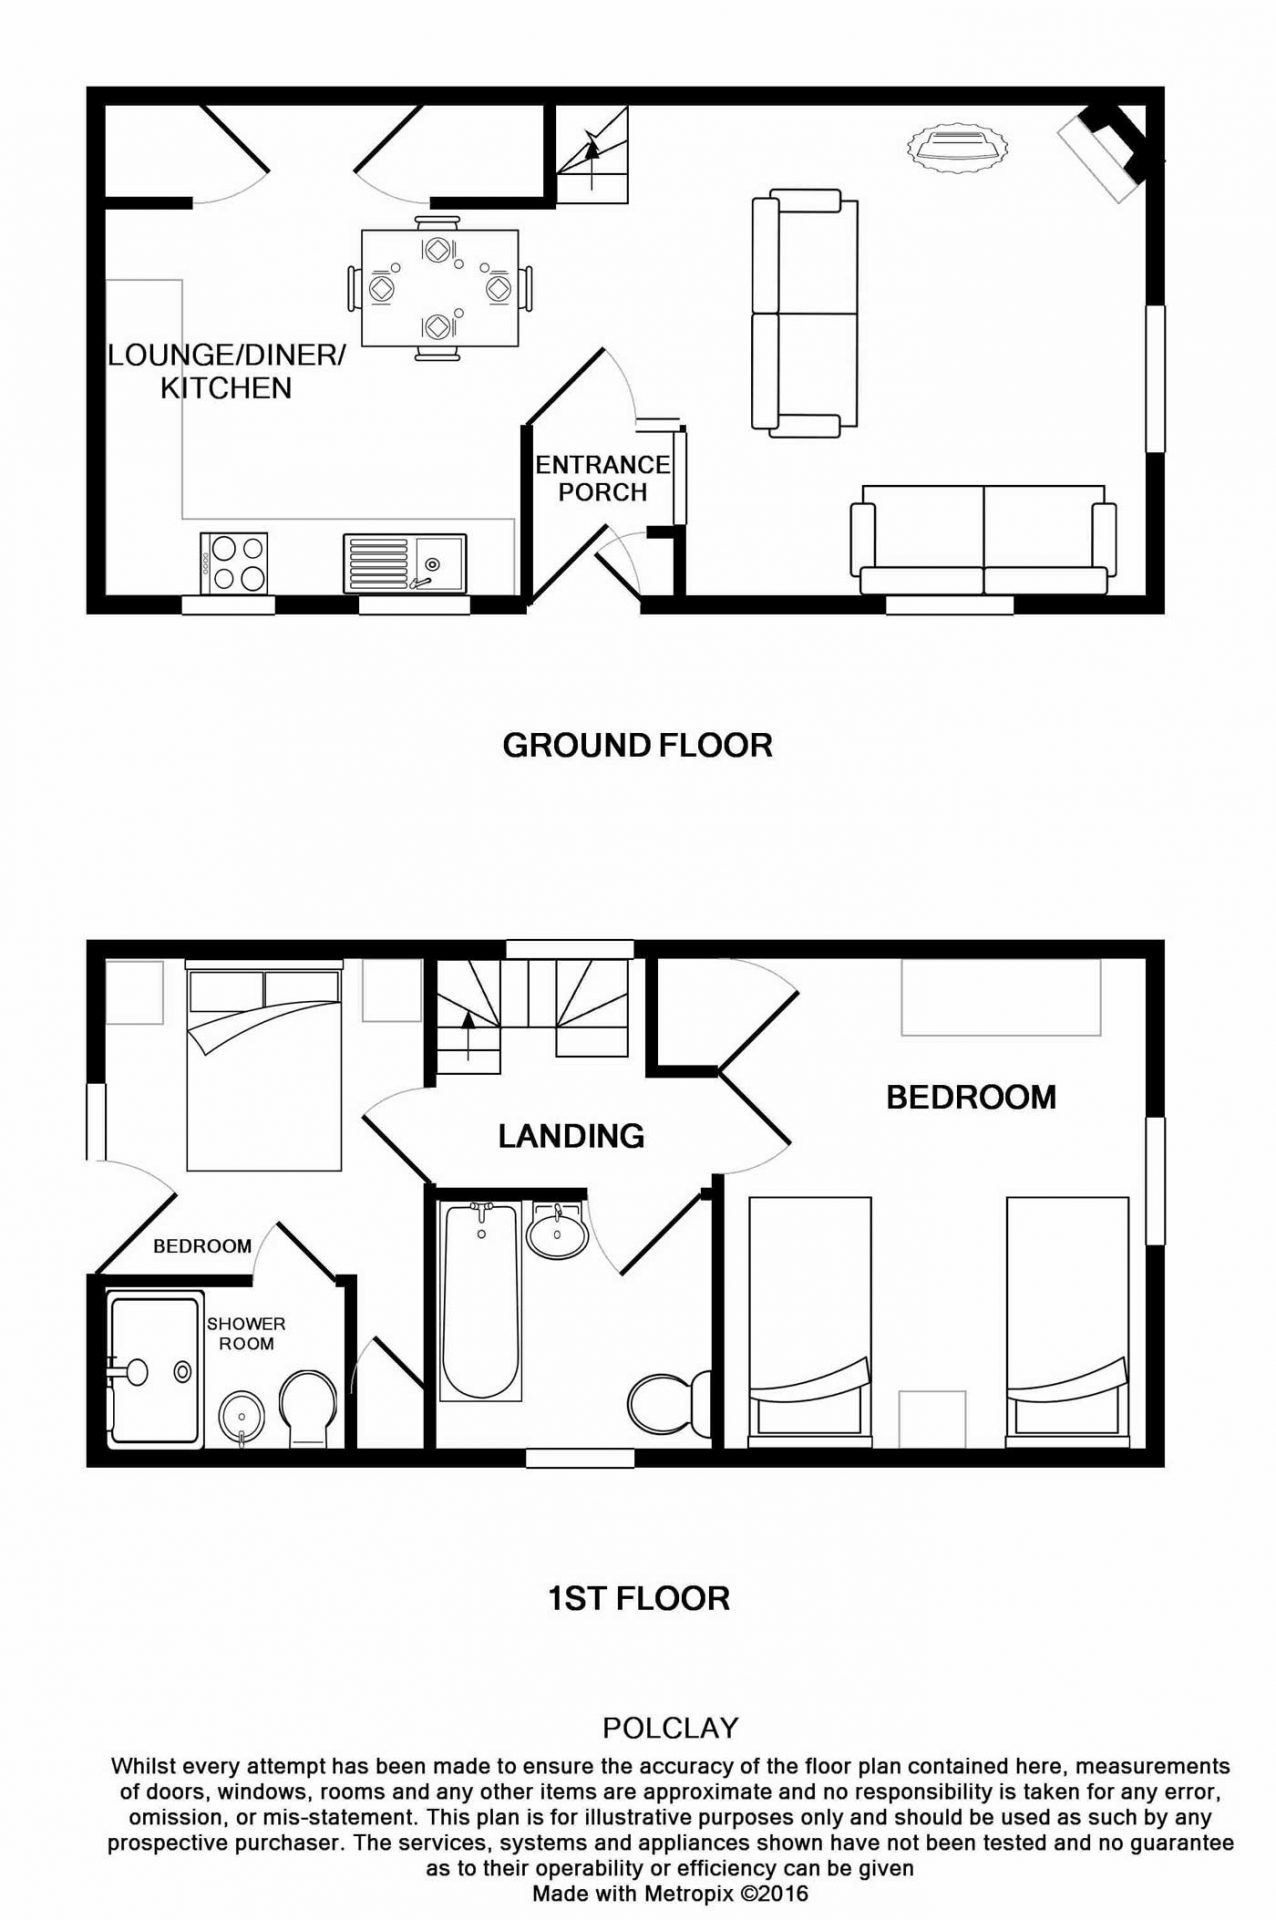 Polclay Floor Plan Luxury Self Catering Holiday Cottages